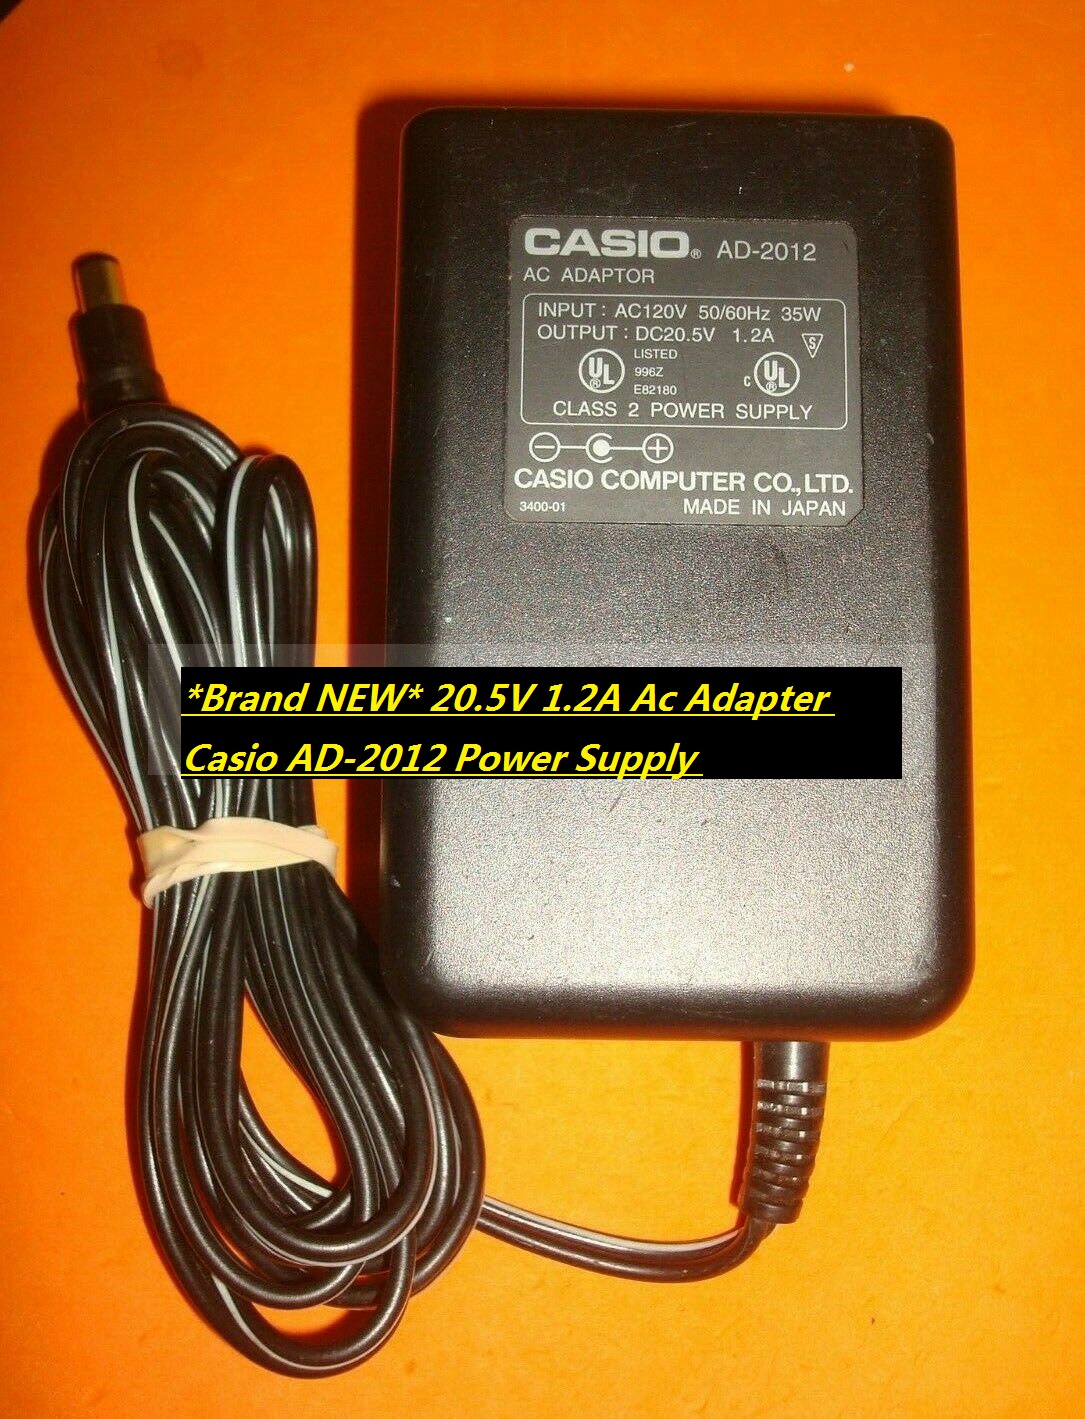 *Brand NEW* 20.5V 1.2A Ac Adapter Casio AD-2012 Power Supply